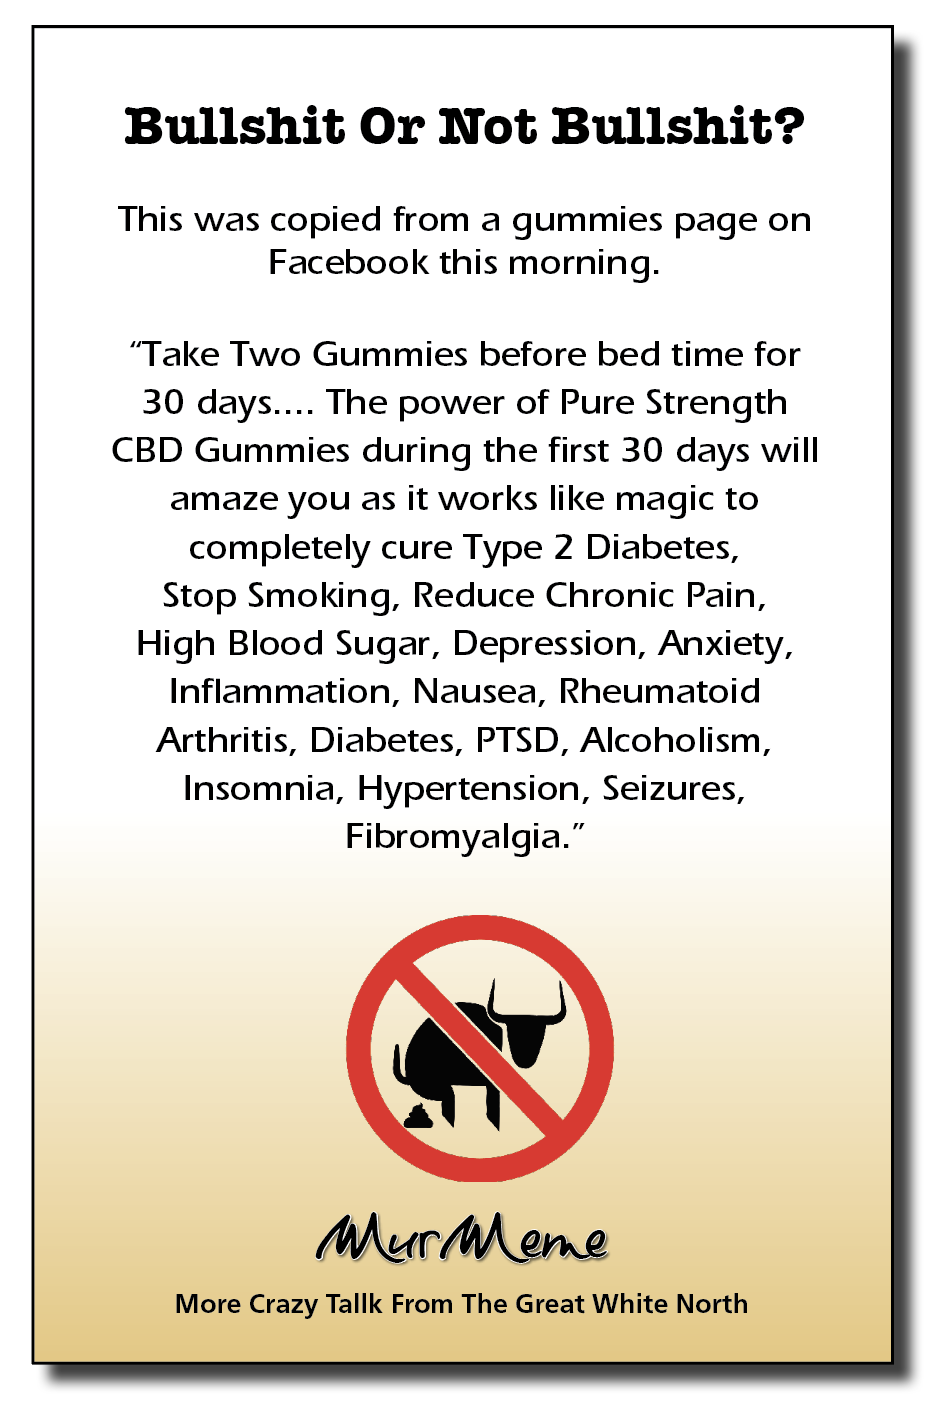 Bullshit Or Not Bullshit?

This was copied from a gummies page on
Facebook this morning.

“Take Two Gummies before bed time for
30 days.... The power of Pure Strength
CBD Gummies during the first 30 days will
amaze you as it works like magic to
completely cure Type 2 Diabetes,
Stop Smoking, Reduce Chronic Pain,
High Blood Sugar, Depression, Anxiety,
Inflammation, Nausea, Rheumatoid
Arthritis, Diabetes, PTSD, Alcoholism,
Insomnia, Hypertension, Seizures,
Fibromyalgia.”

Mur ene

More Crazy Tallk From The Great White North